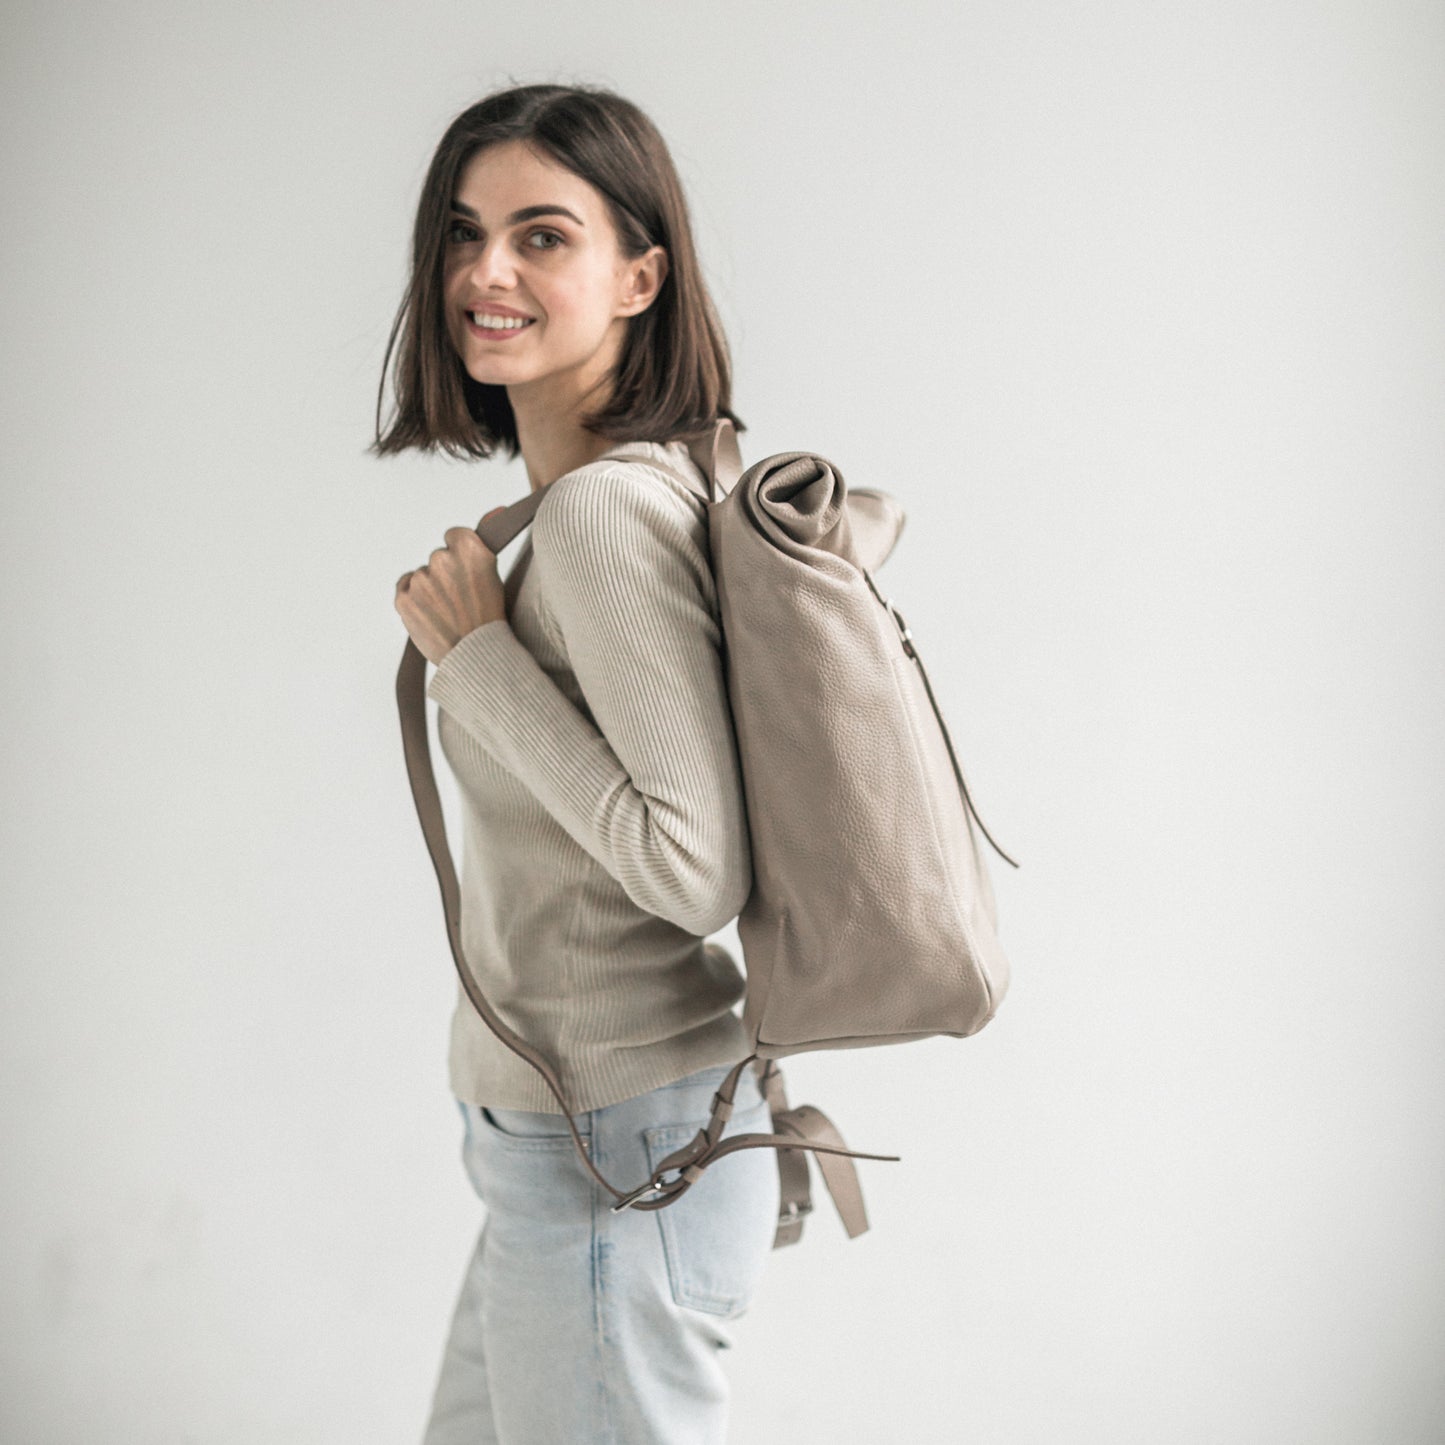 Leather rolltop backpack